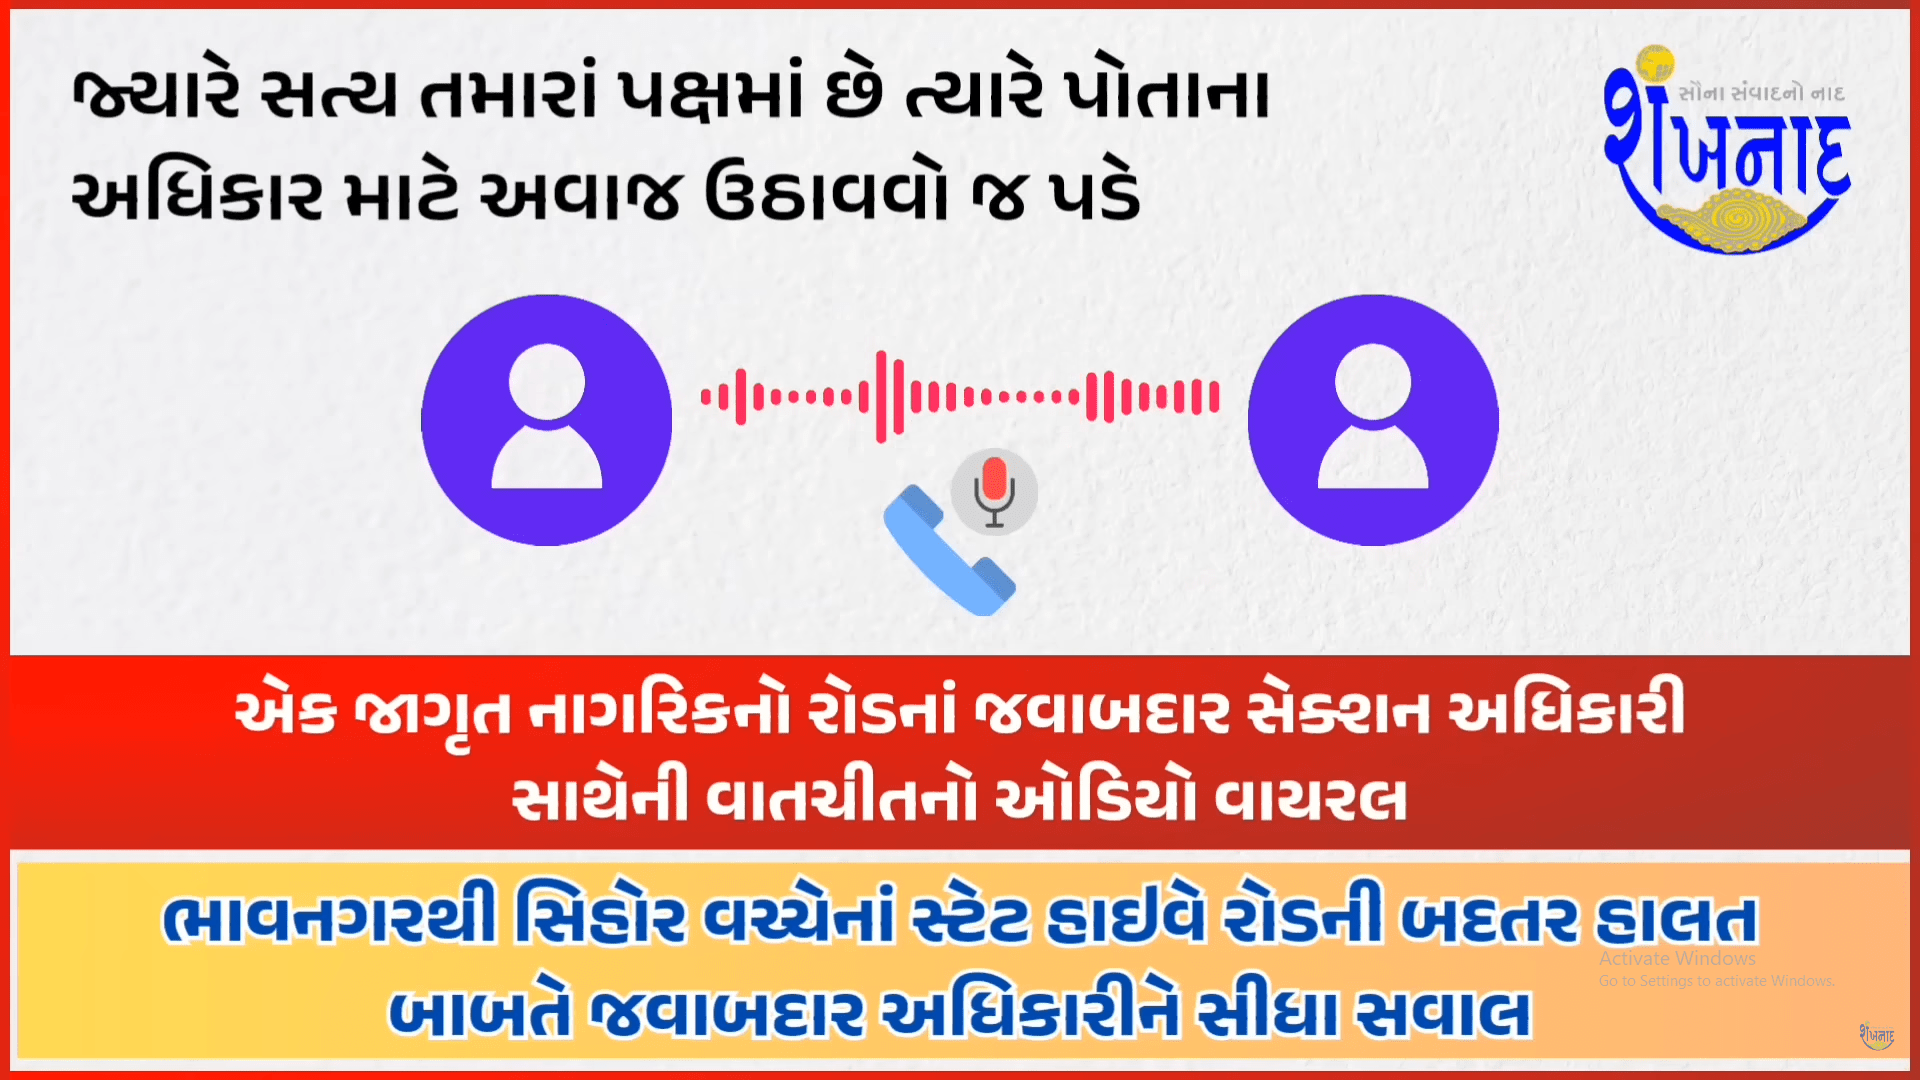 Direct question to the responsible officer regarding the bad condition of the state highway road between Bhavnagar to Sihore.